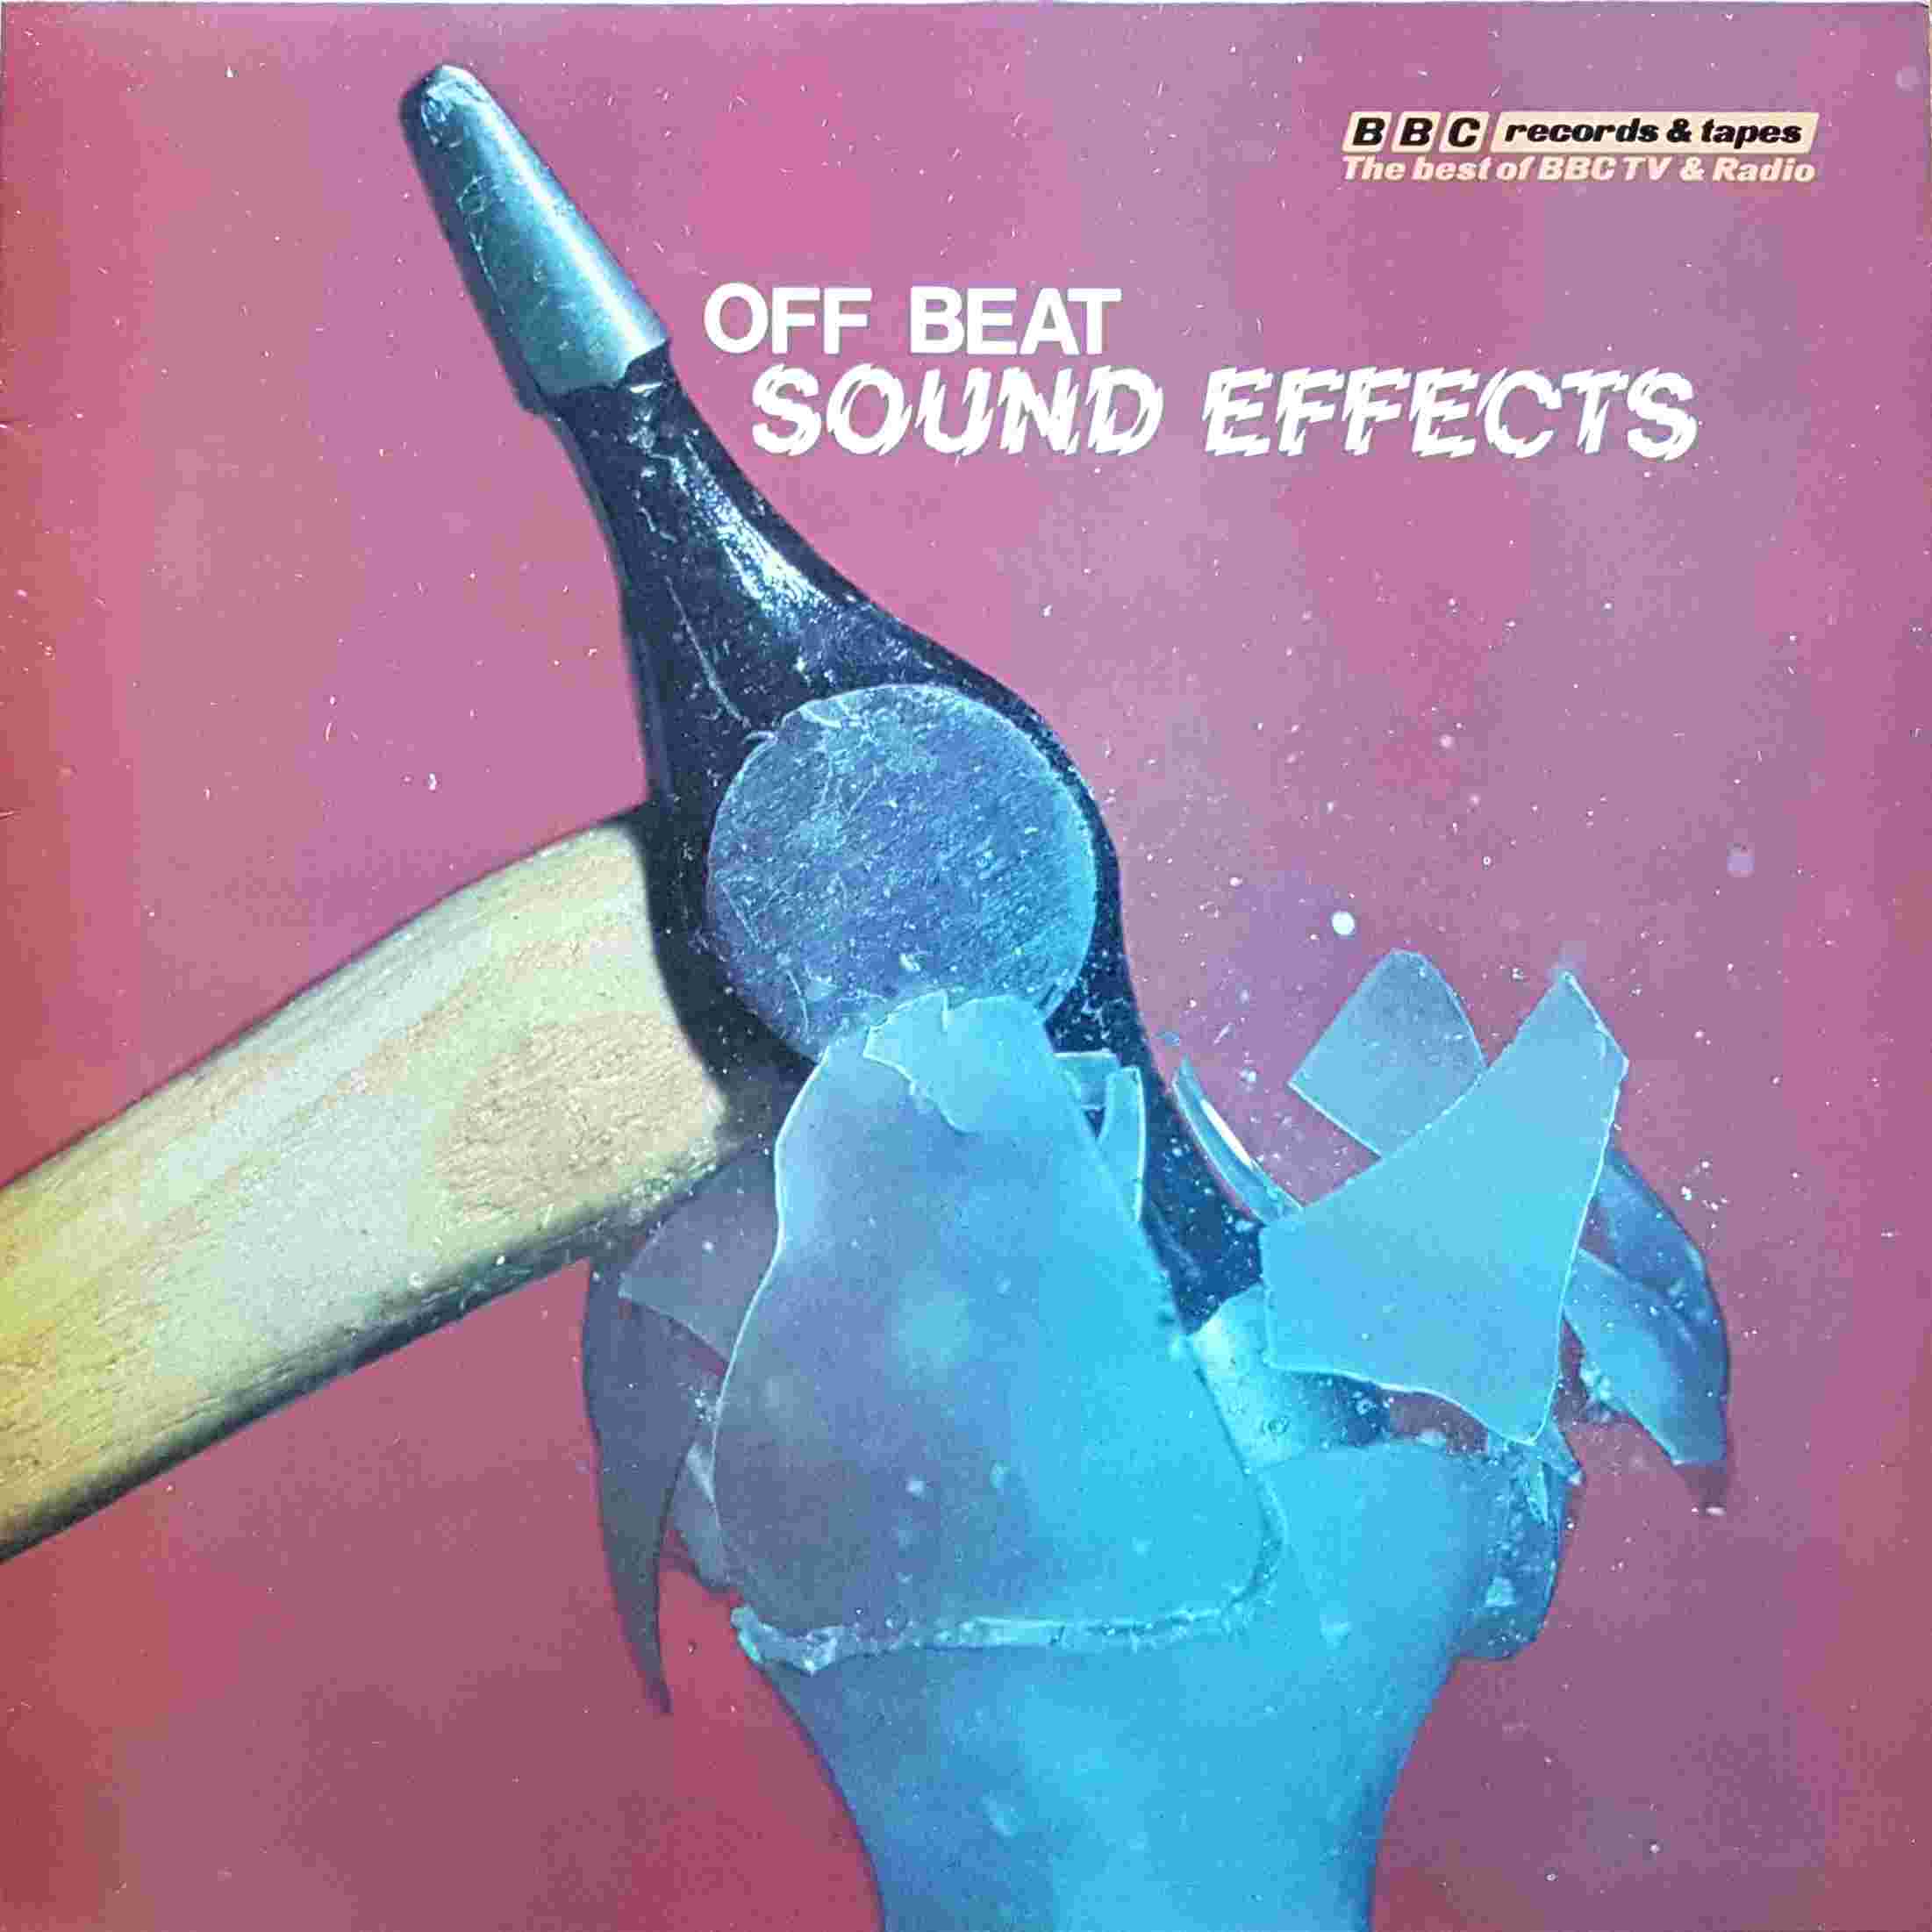 Picture of REC 198 Off beat sound effects by artist Various from the BBC albums - Records and Tapes library